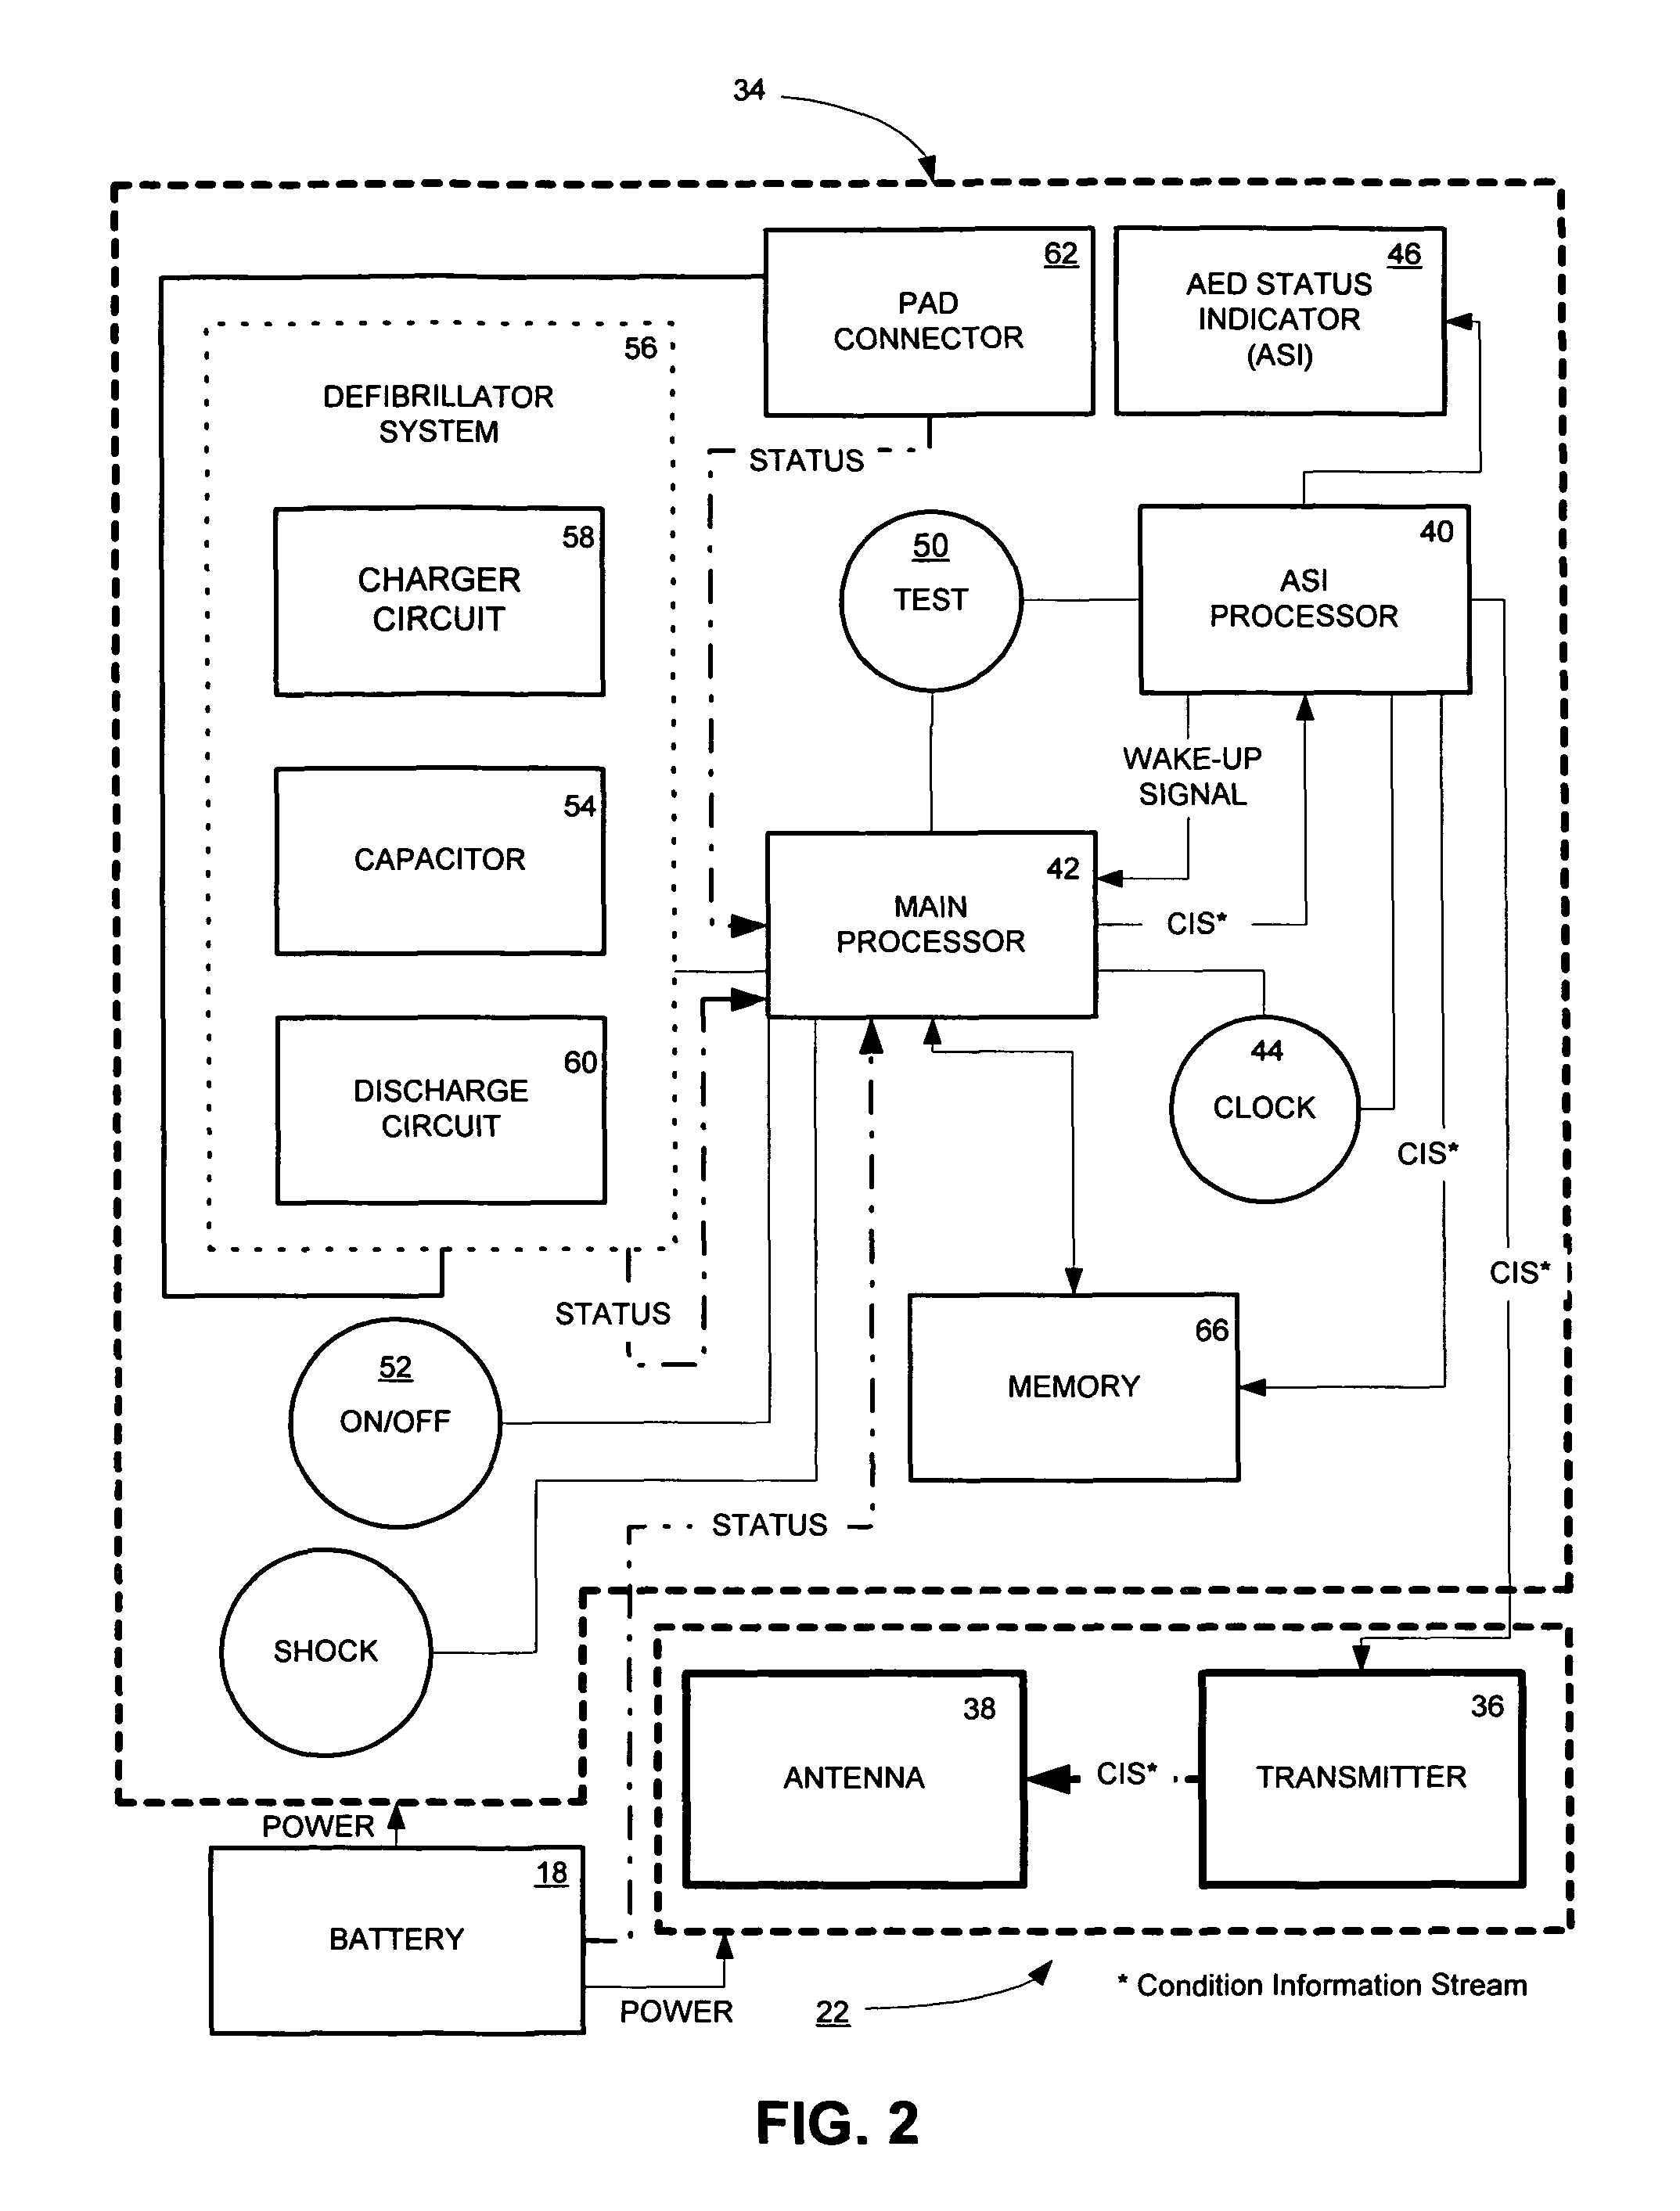 System and method for monitoring external portable medical devices